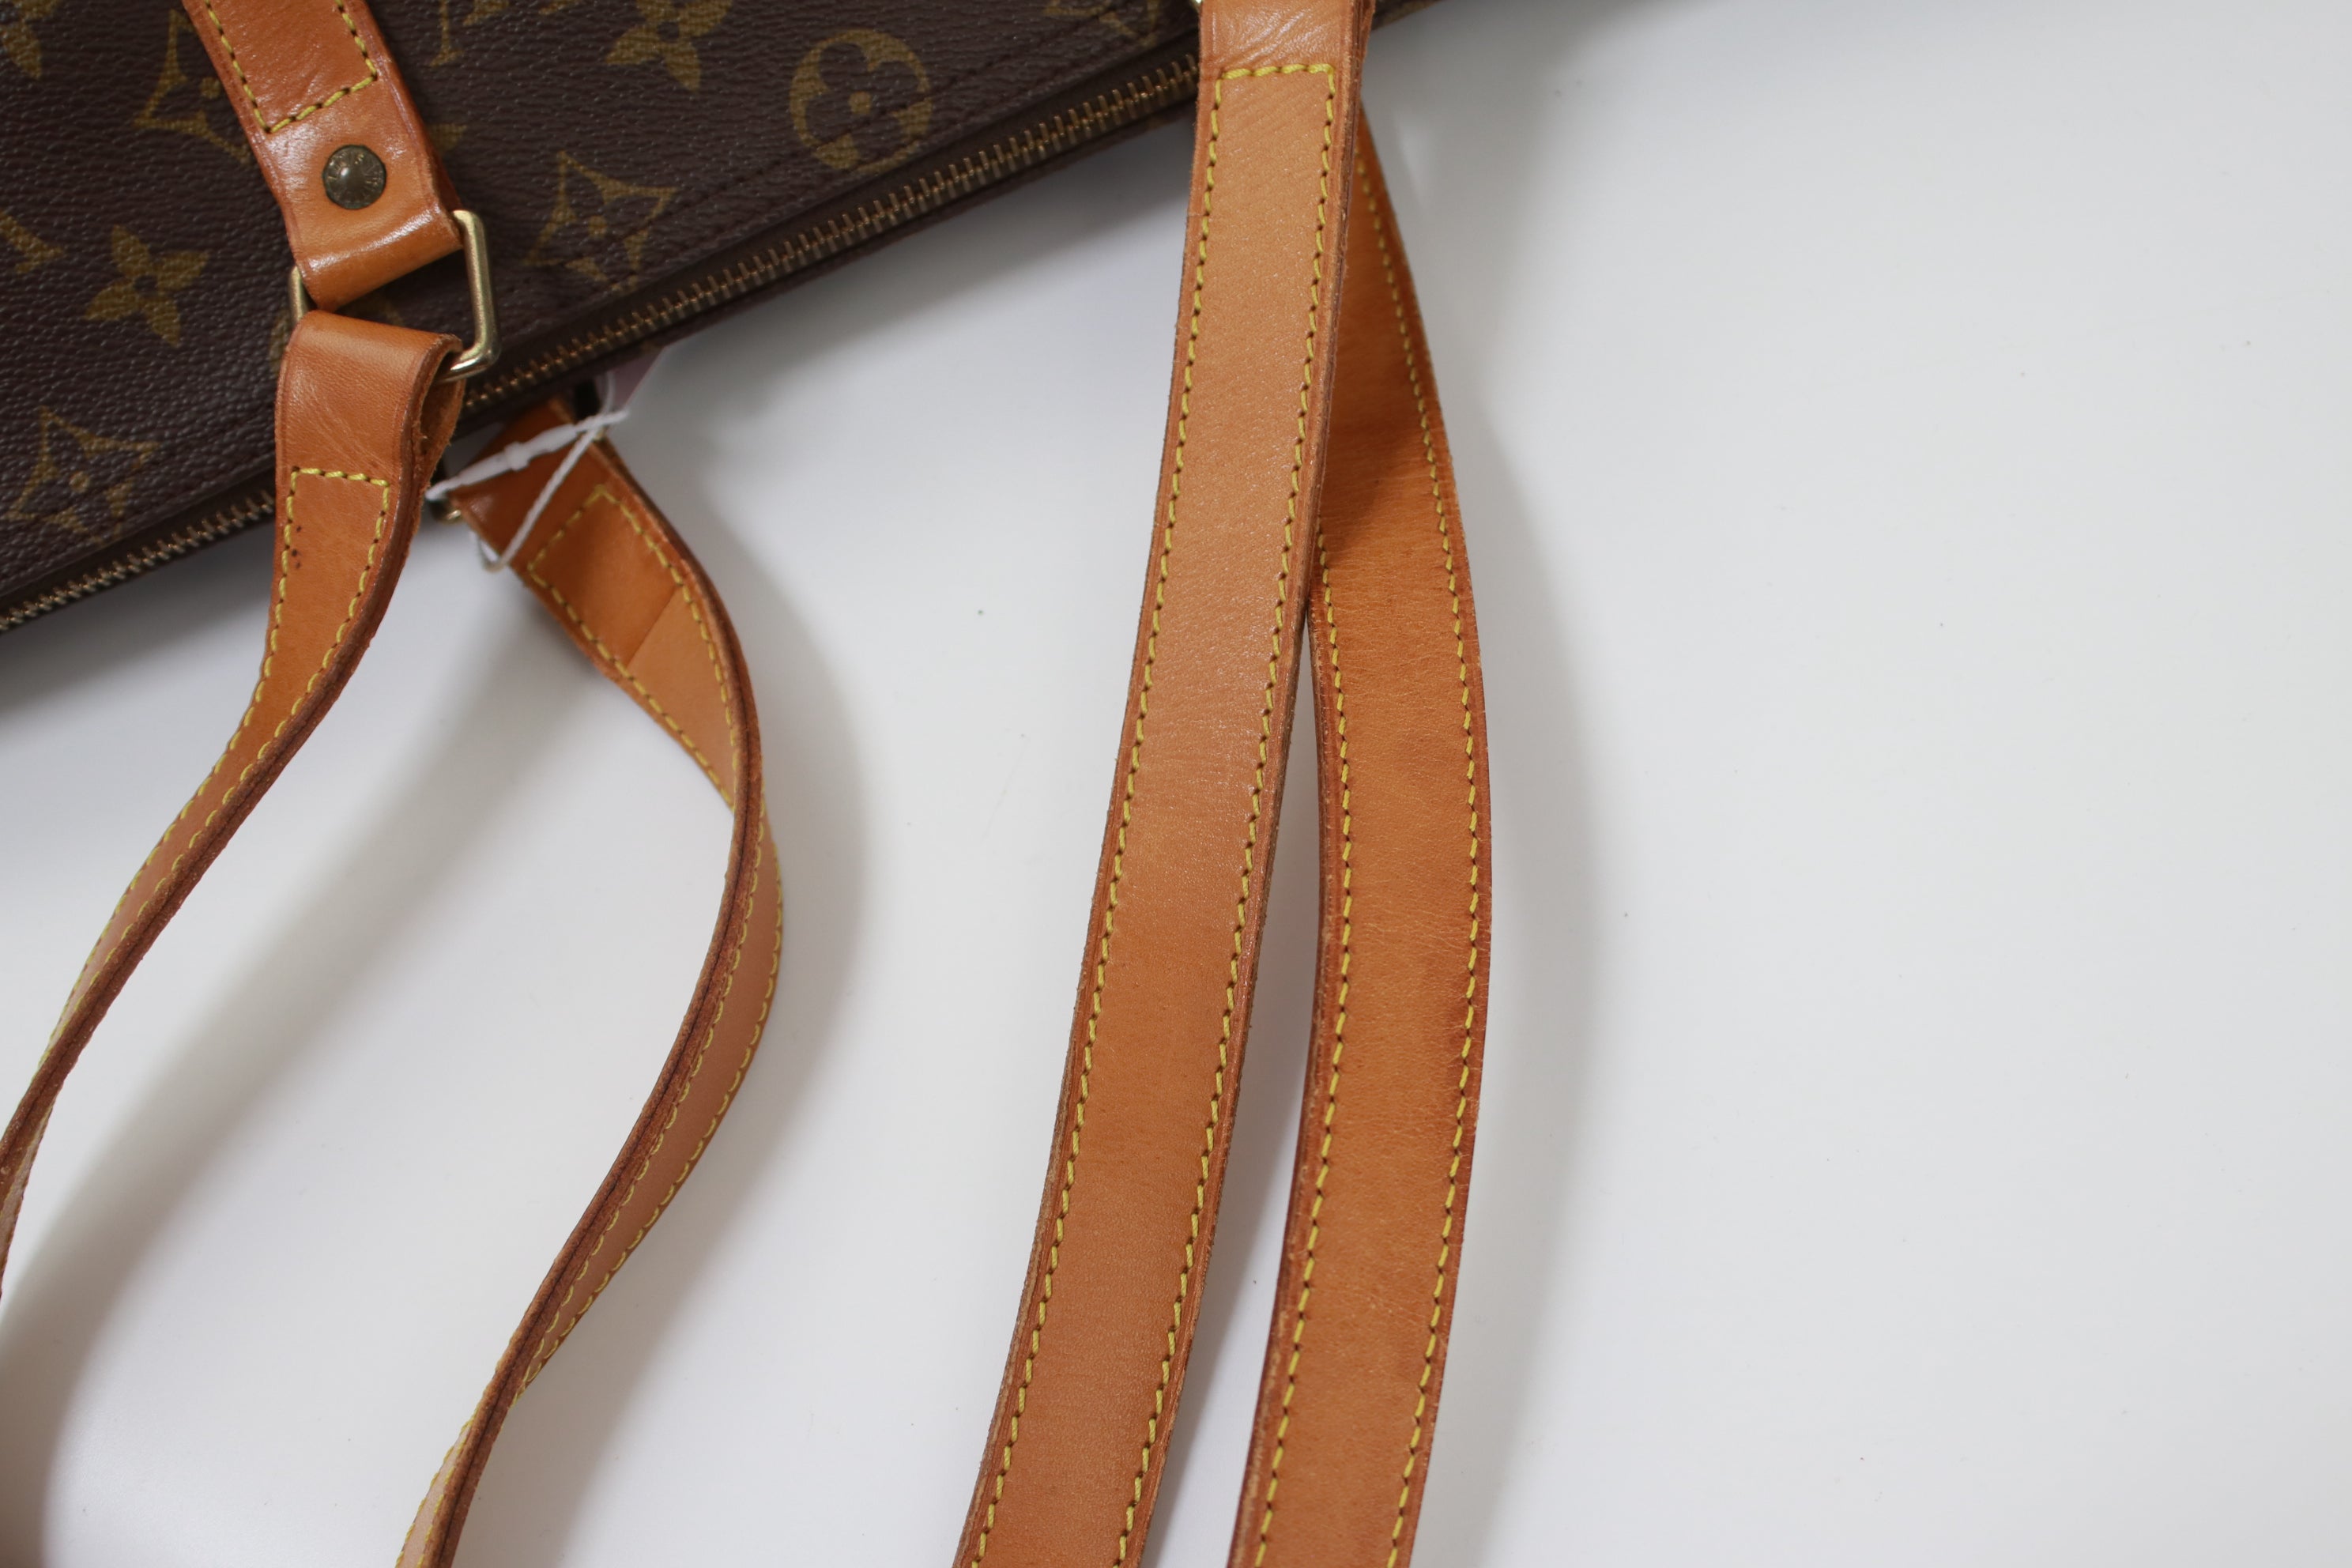 Louis Vuitton Monceau 28 Two Way Bag Used (6684)